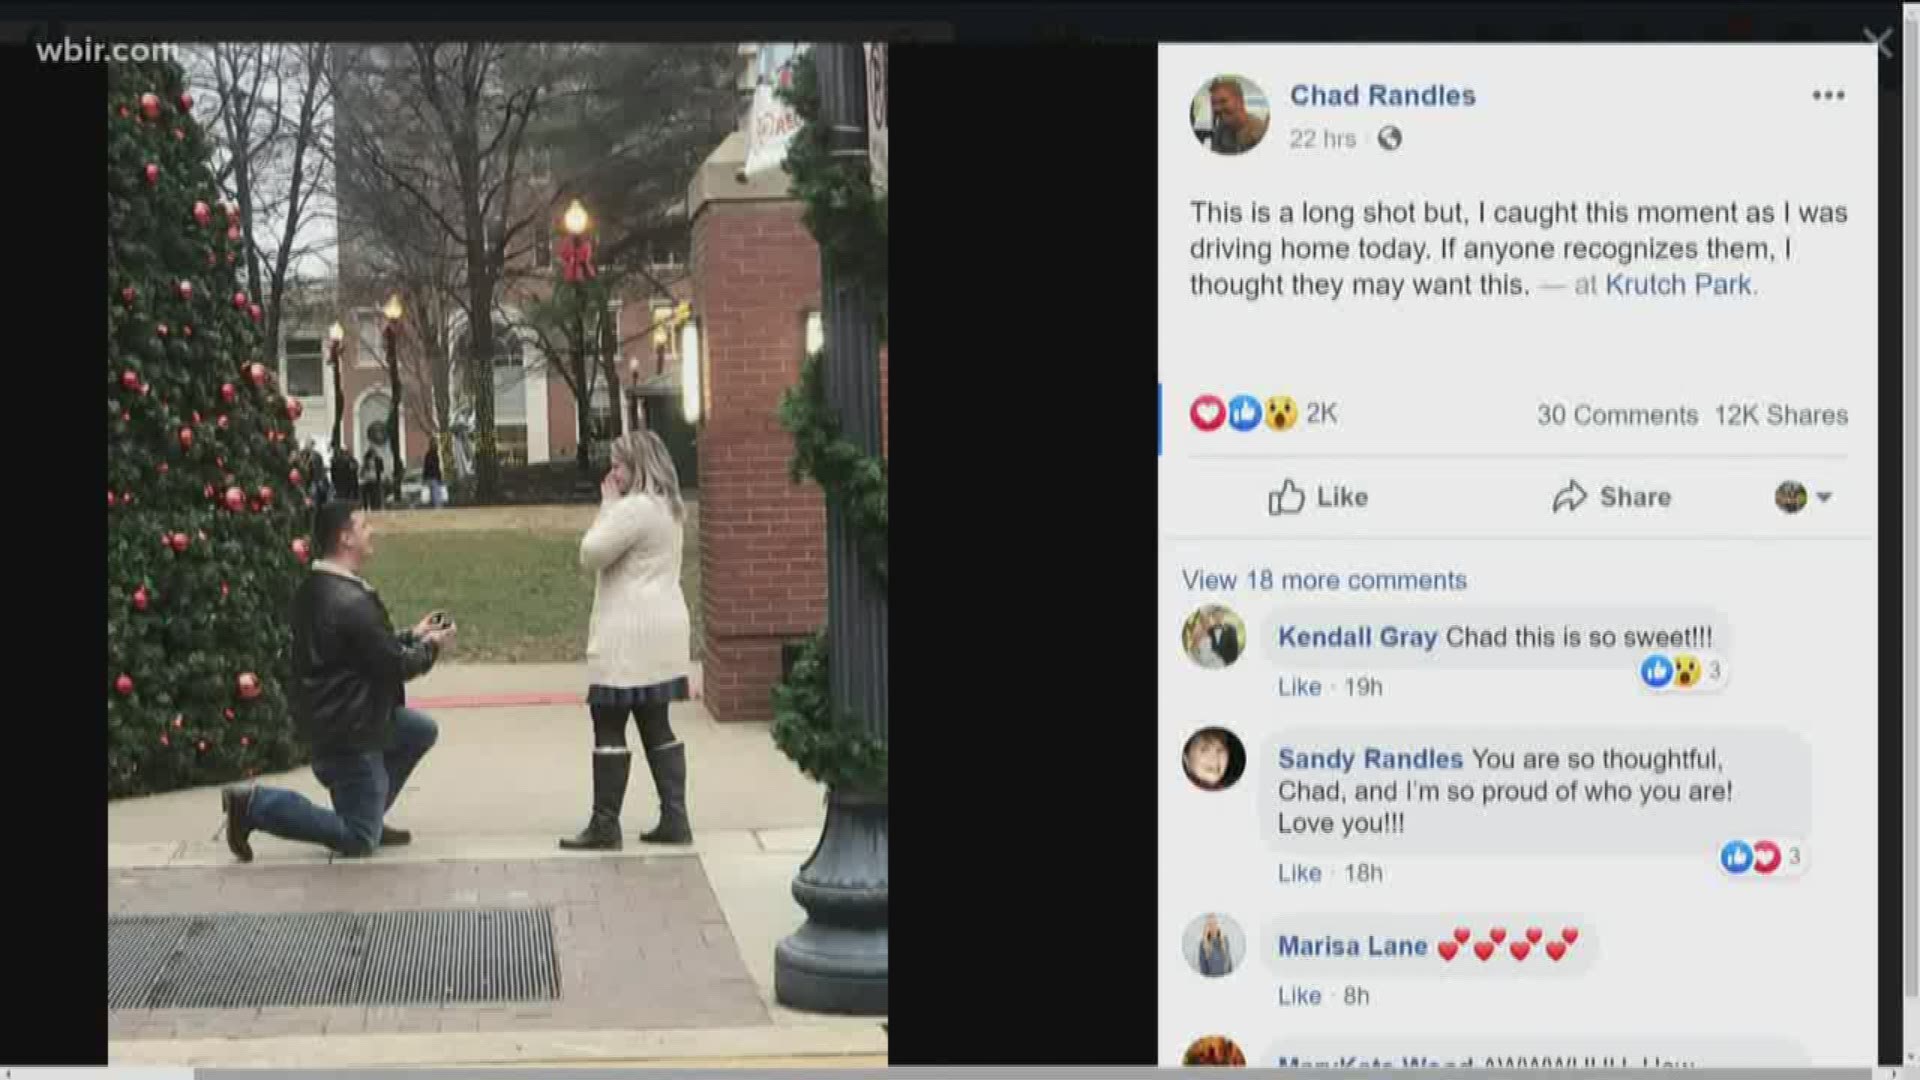 Chad Randles was heading home from work when he saw a man get down on one knee and pop the question to his girlfriend in Krutch Park in Downtown Knoxville.